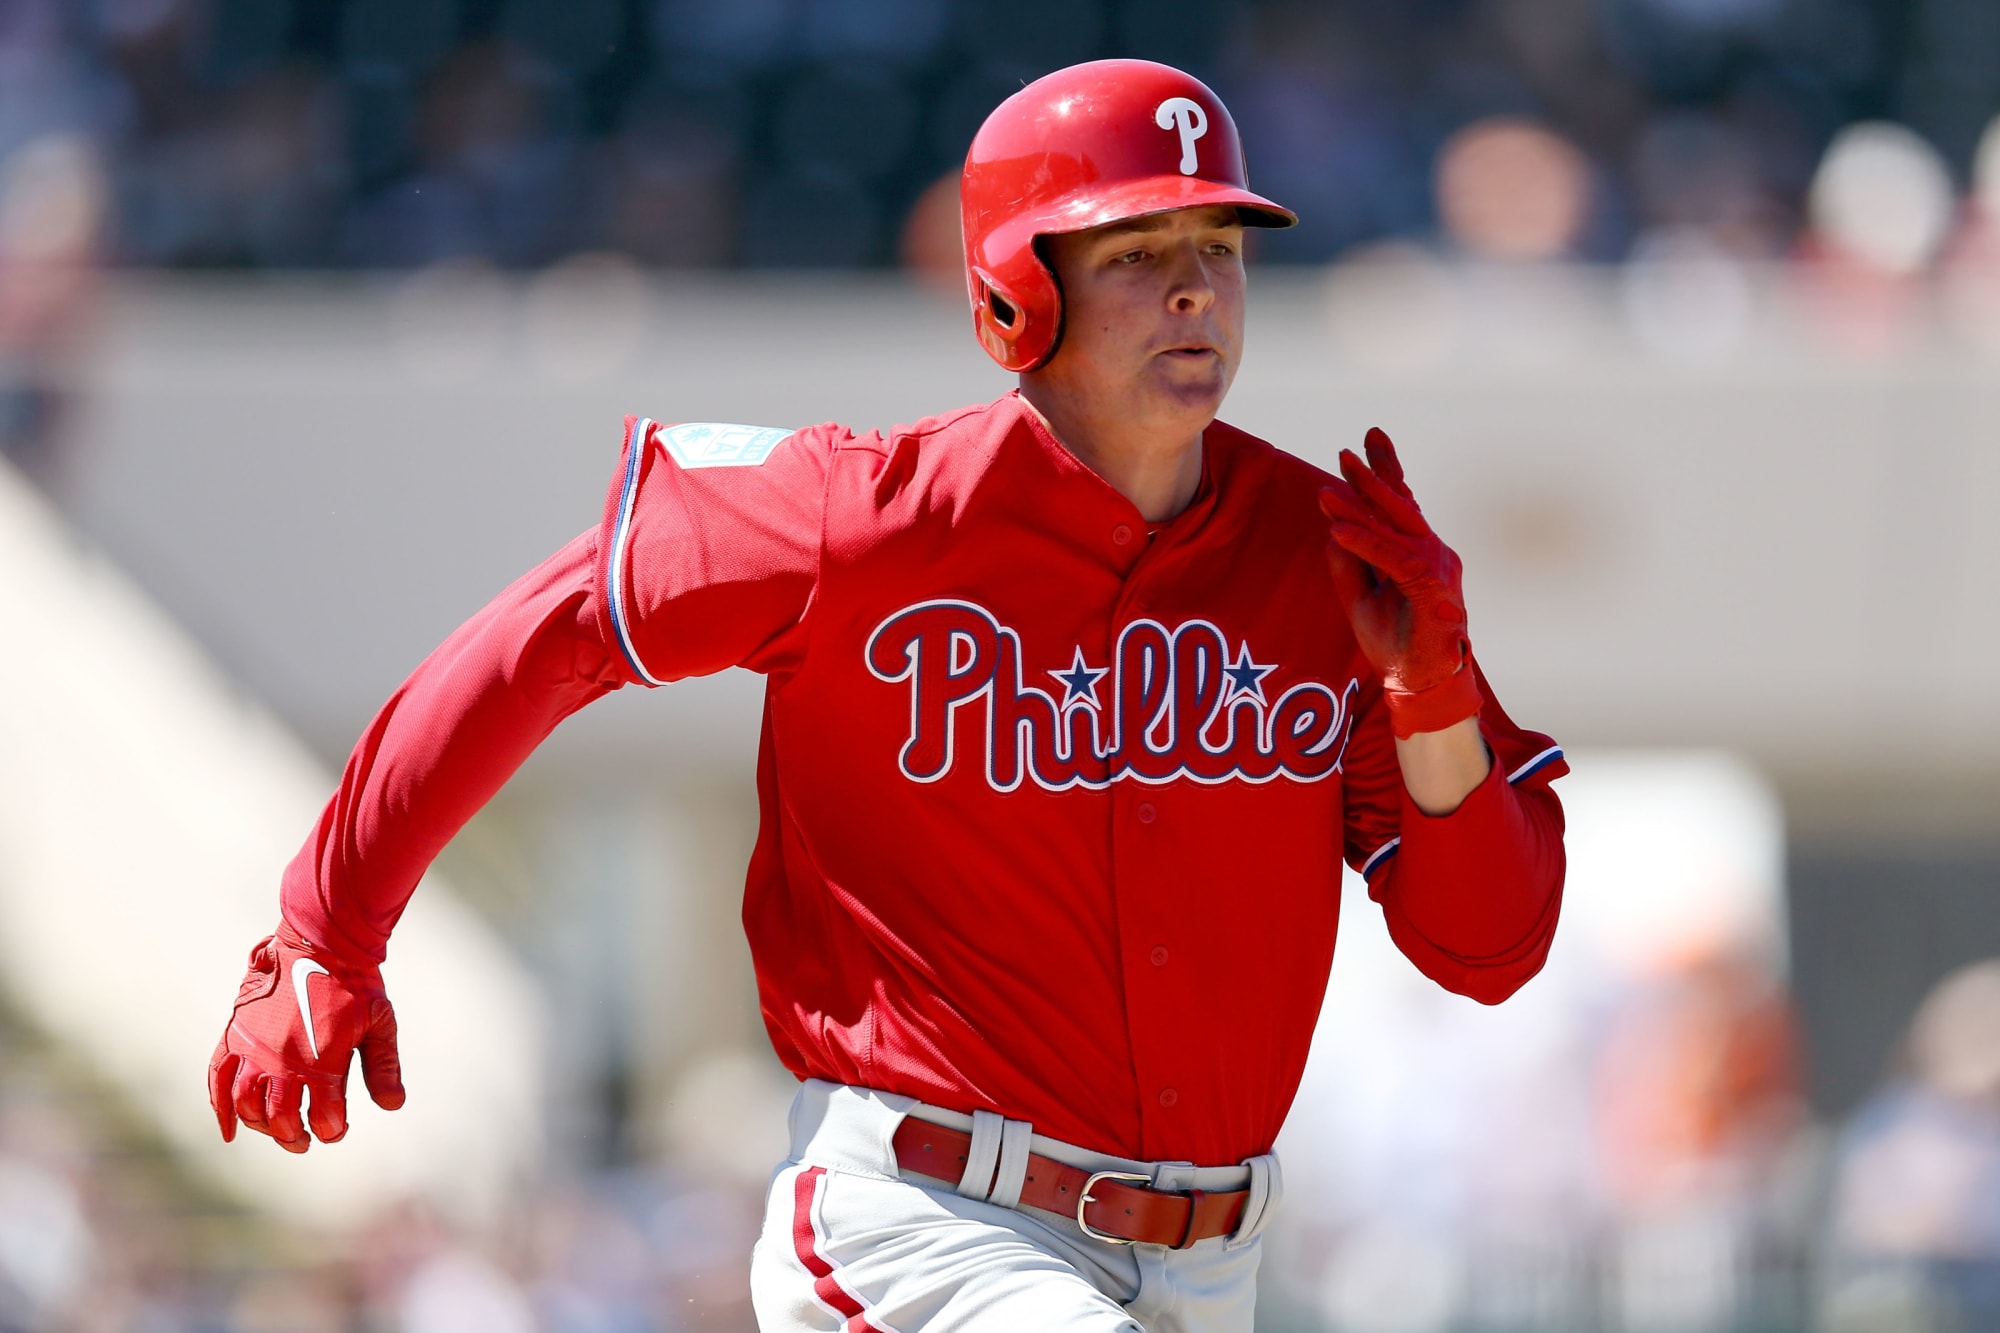 Phillies promote 2016 first overall pick OF Mickey Moniak